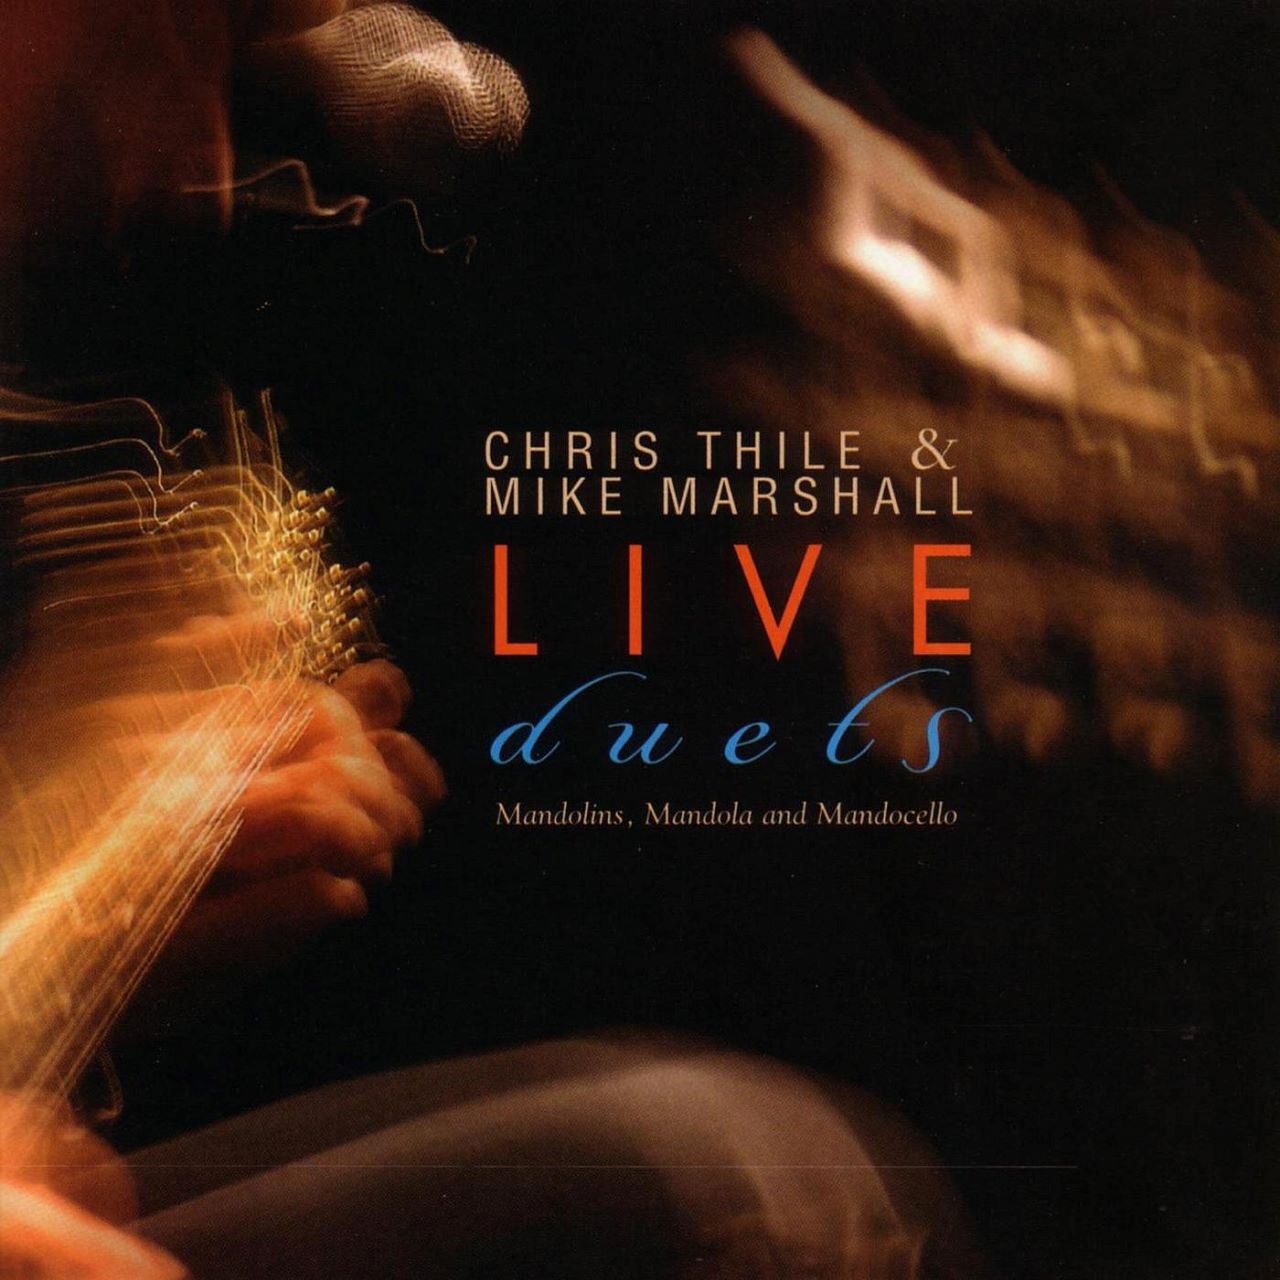 Chris Thile & Mike Marshall - Live Duets cover album